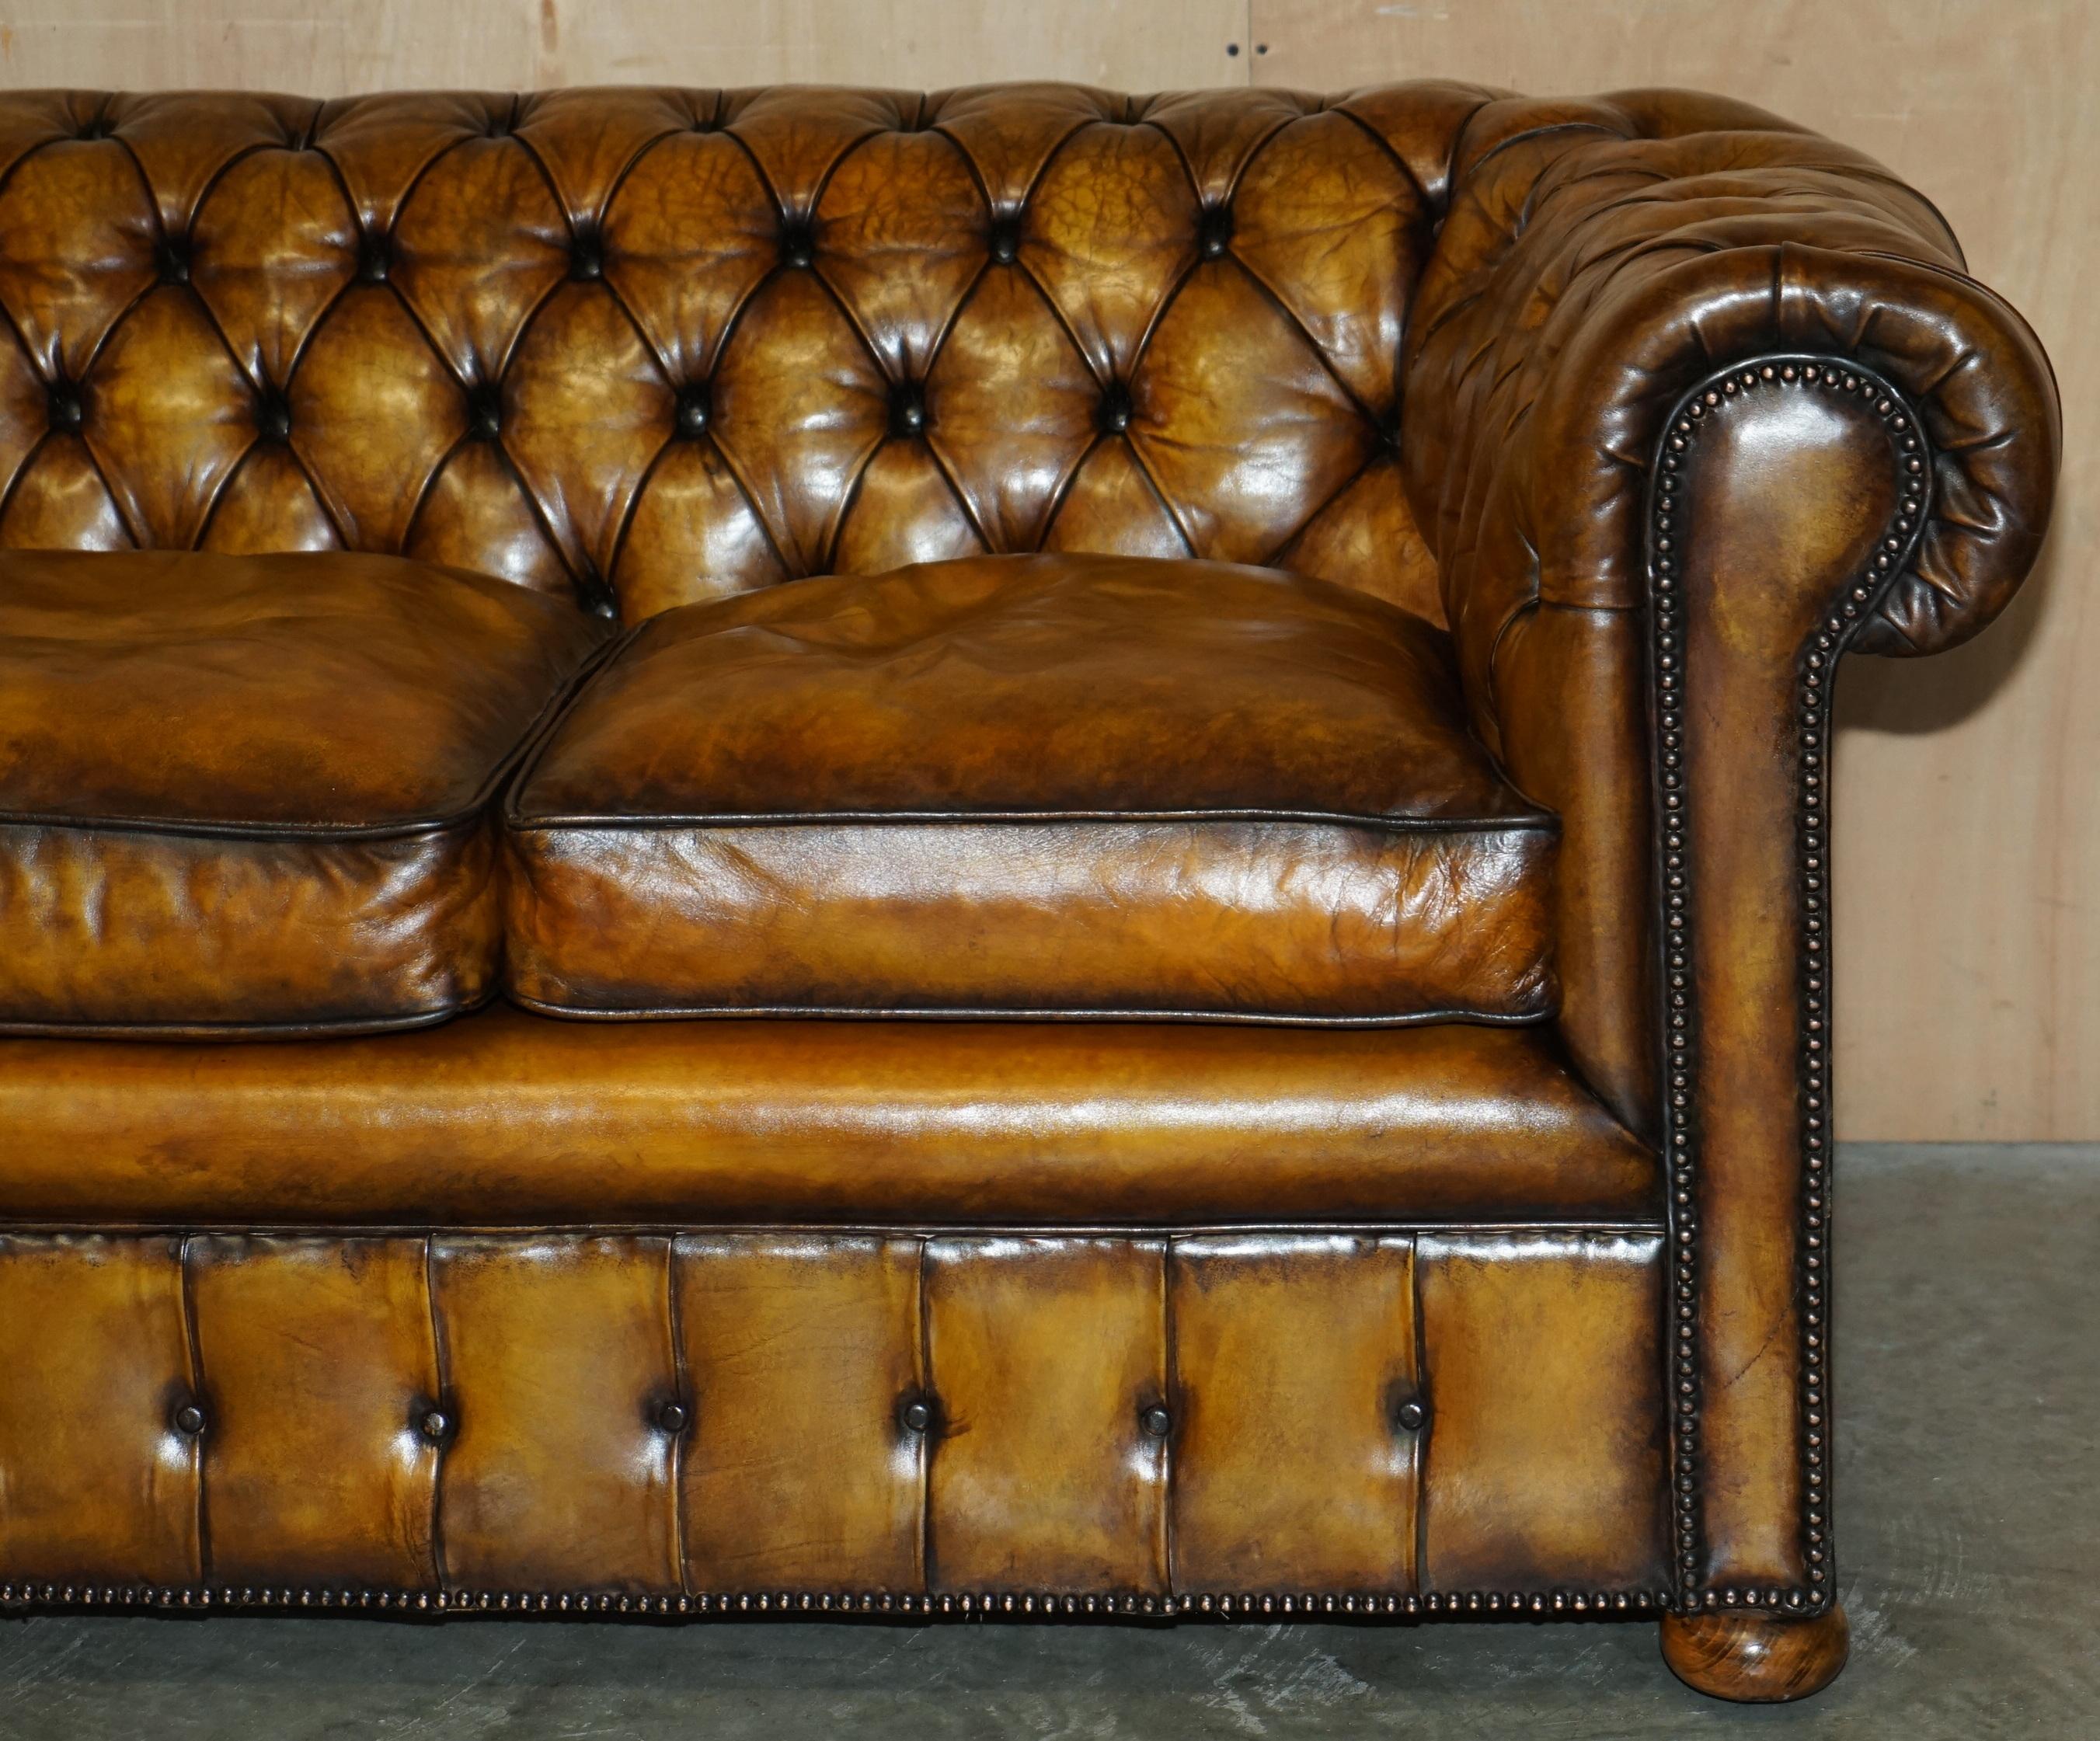 SUPER RARE FULLY RESTORED ViNTAGE CIGAR BROWN LEATHER CHESTERFIELD SOFA PART SET For Sale 6